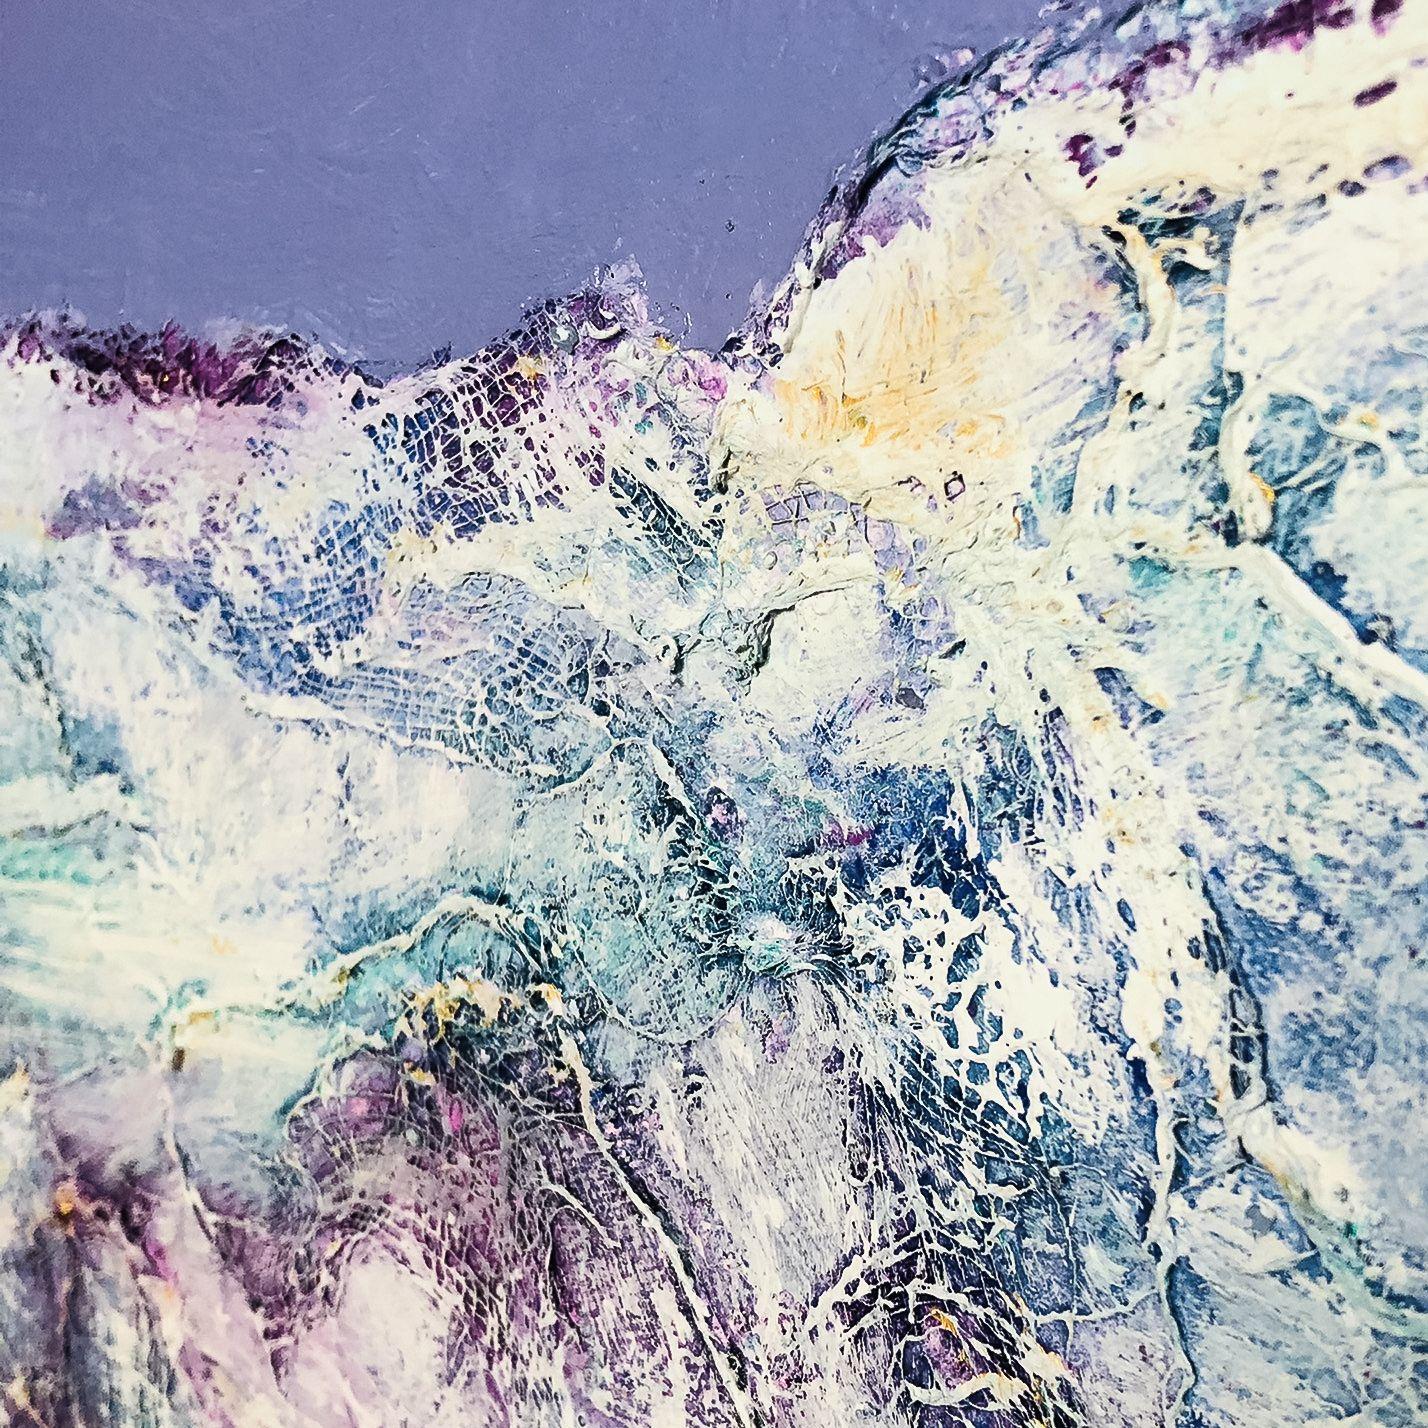 This mixed-media contemporary abstract artwork was created using acrylic paint and ink in the colors Turquoise, Violet, Gold, Copper.  The image lets us imagine perhaps the peaks of a mountain.  Before applying the paint, pieces of cotton fabric